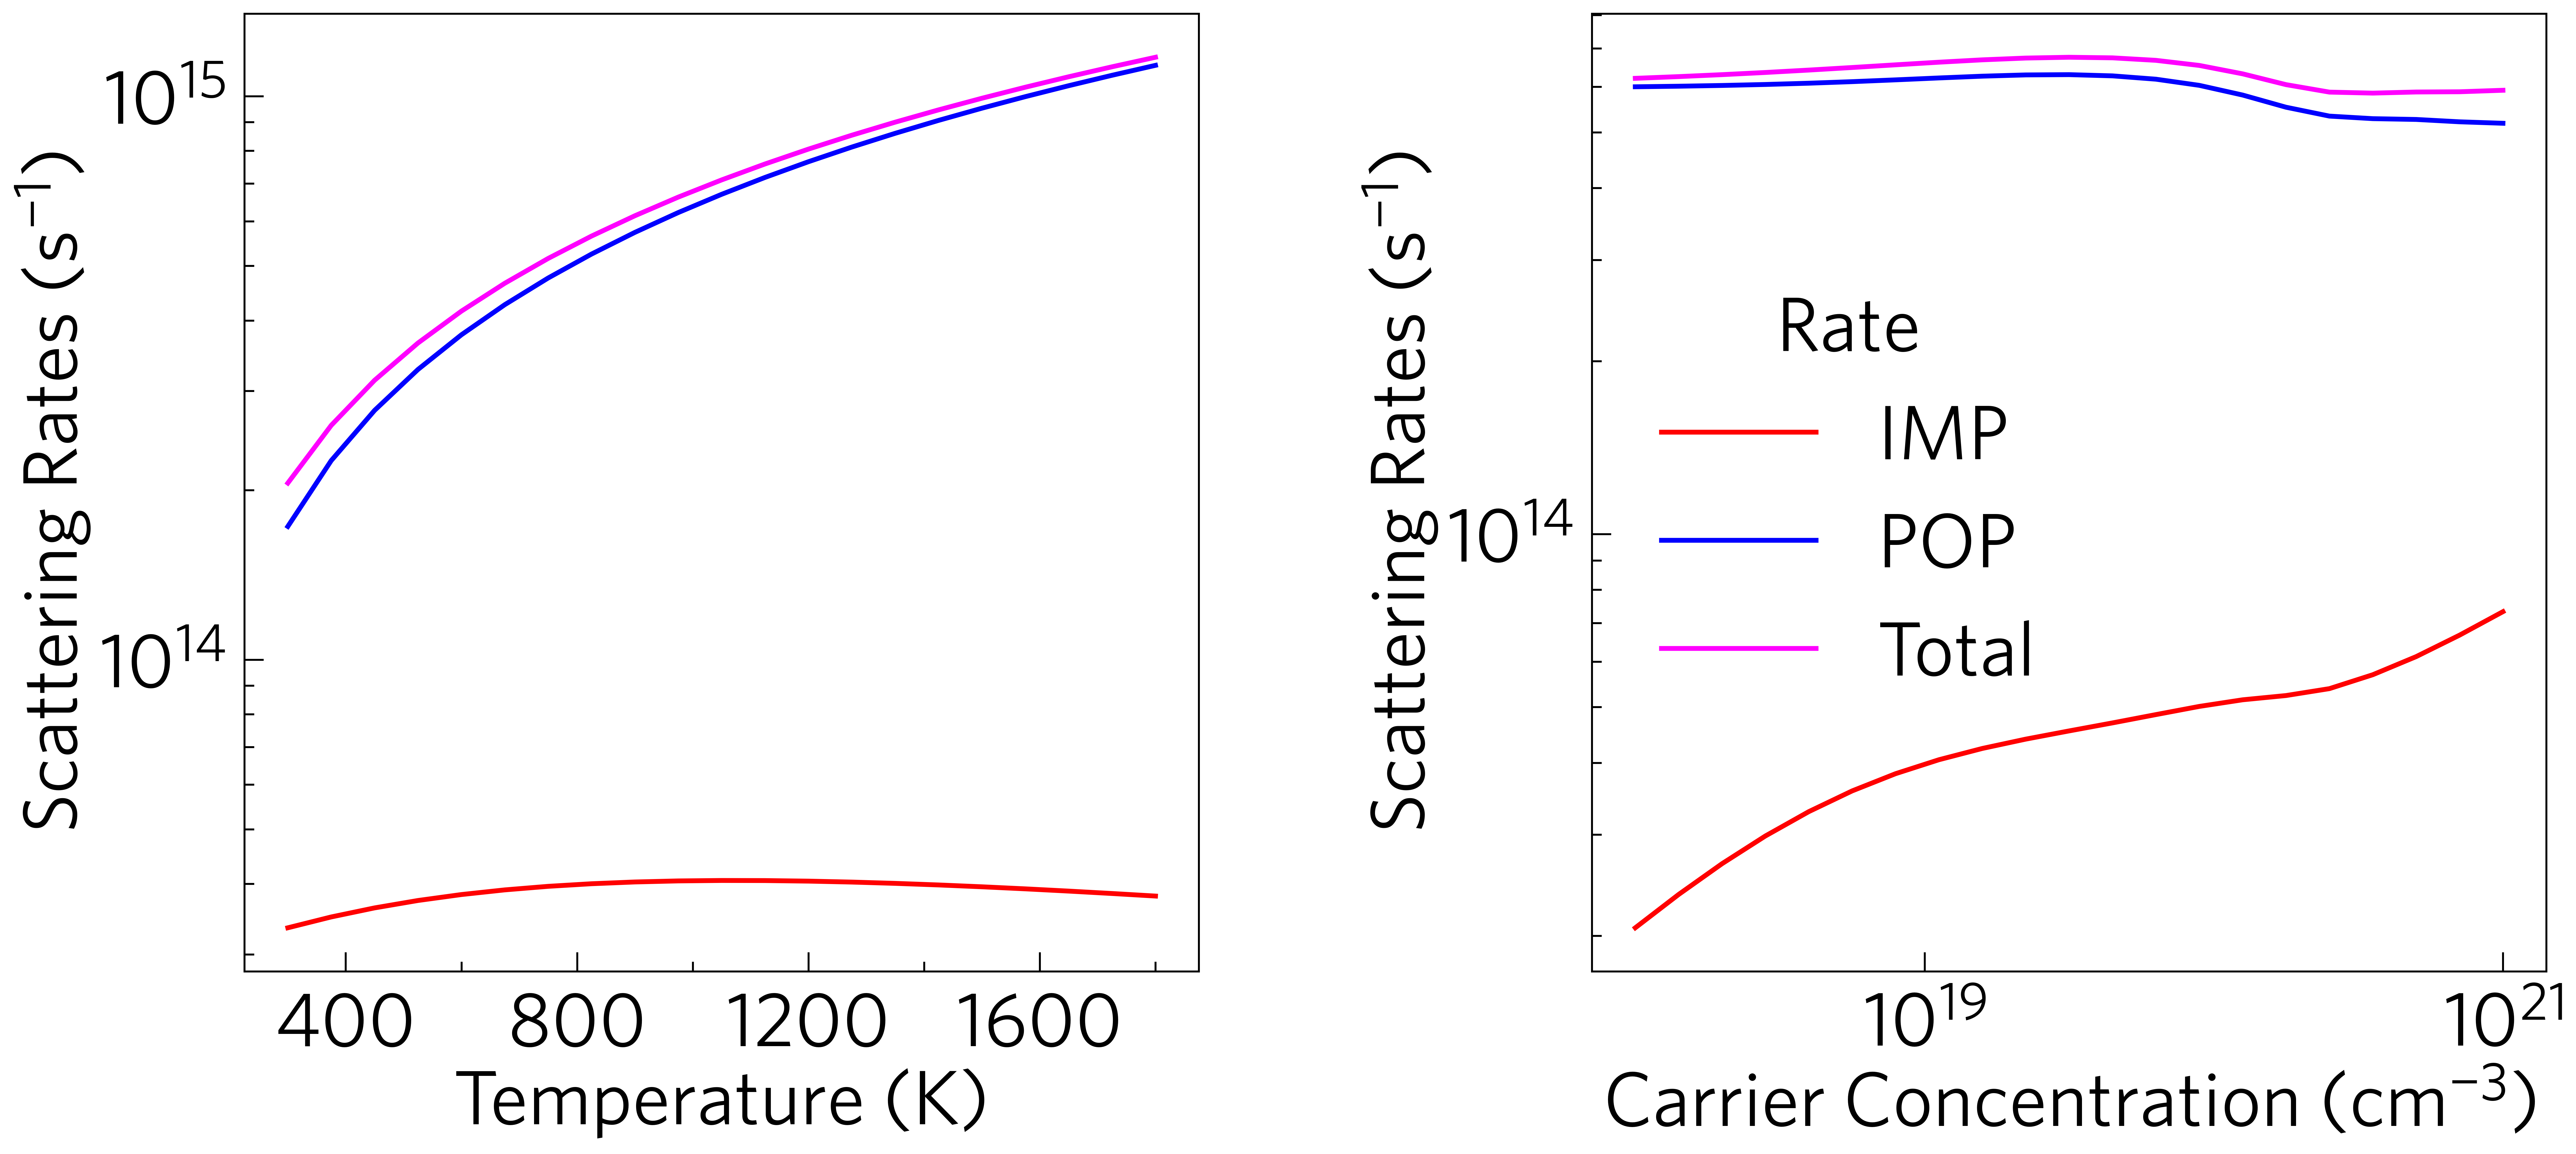 A plot of weighted average scattering rates against temperature and carrier concnetration.